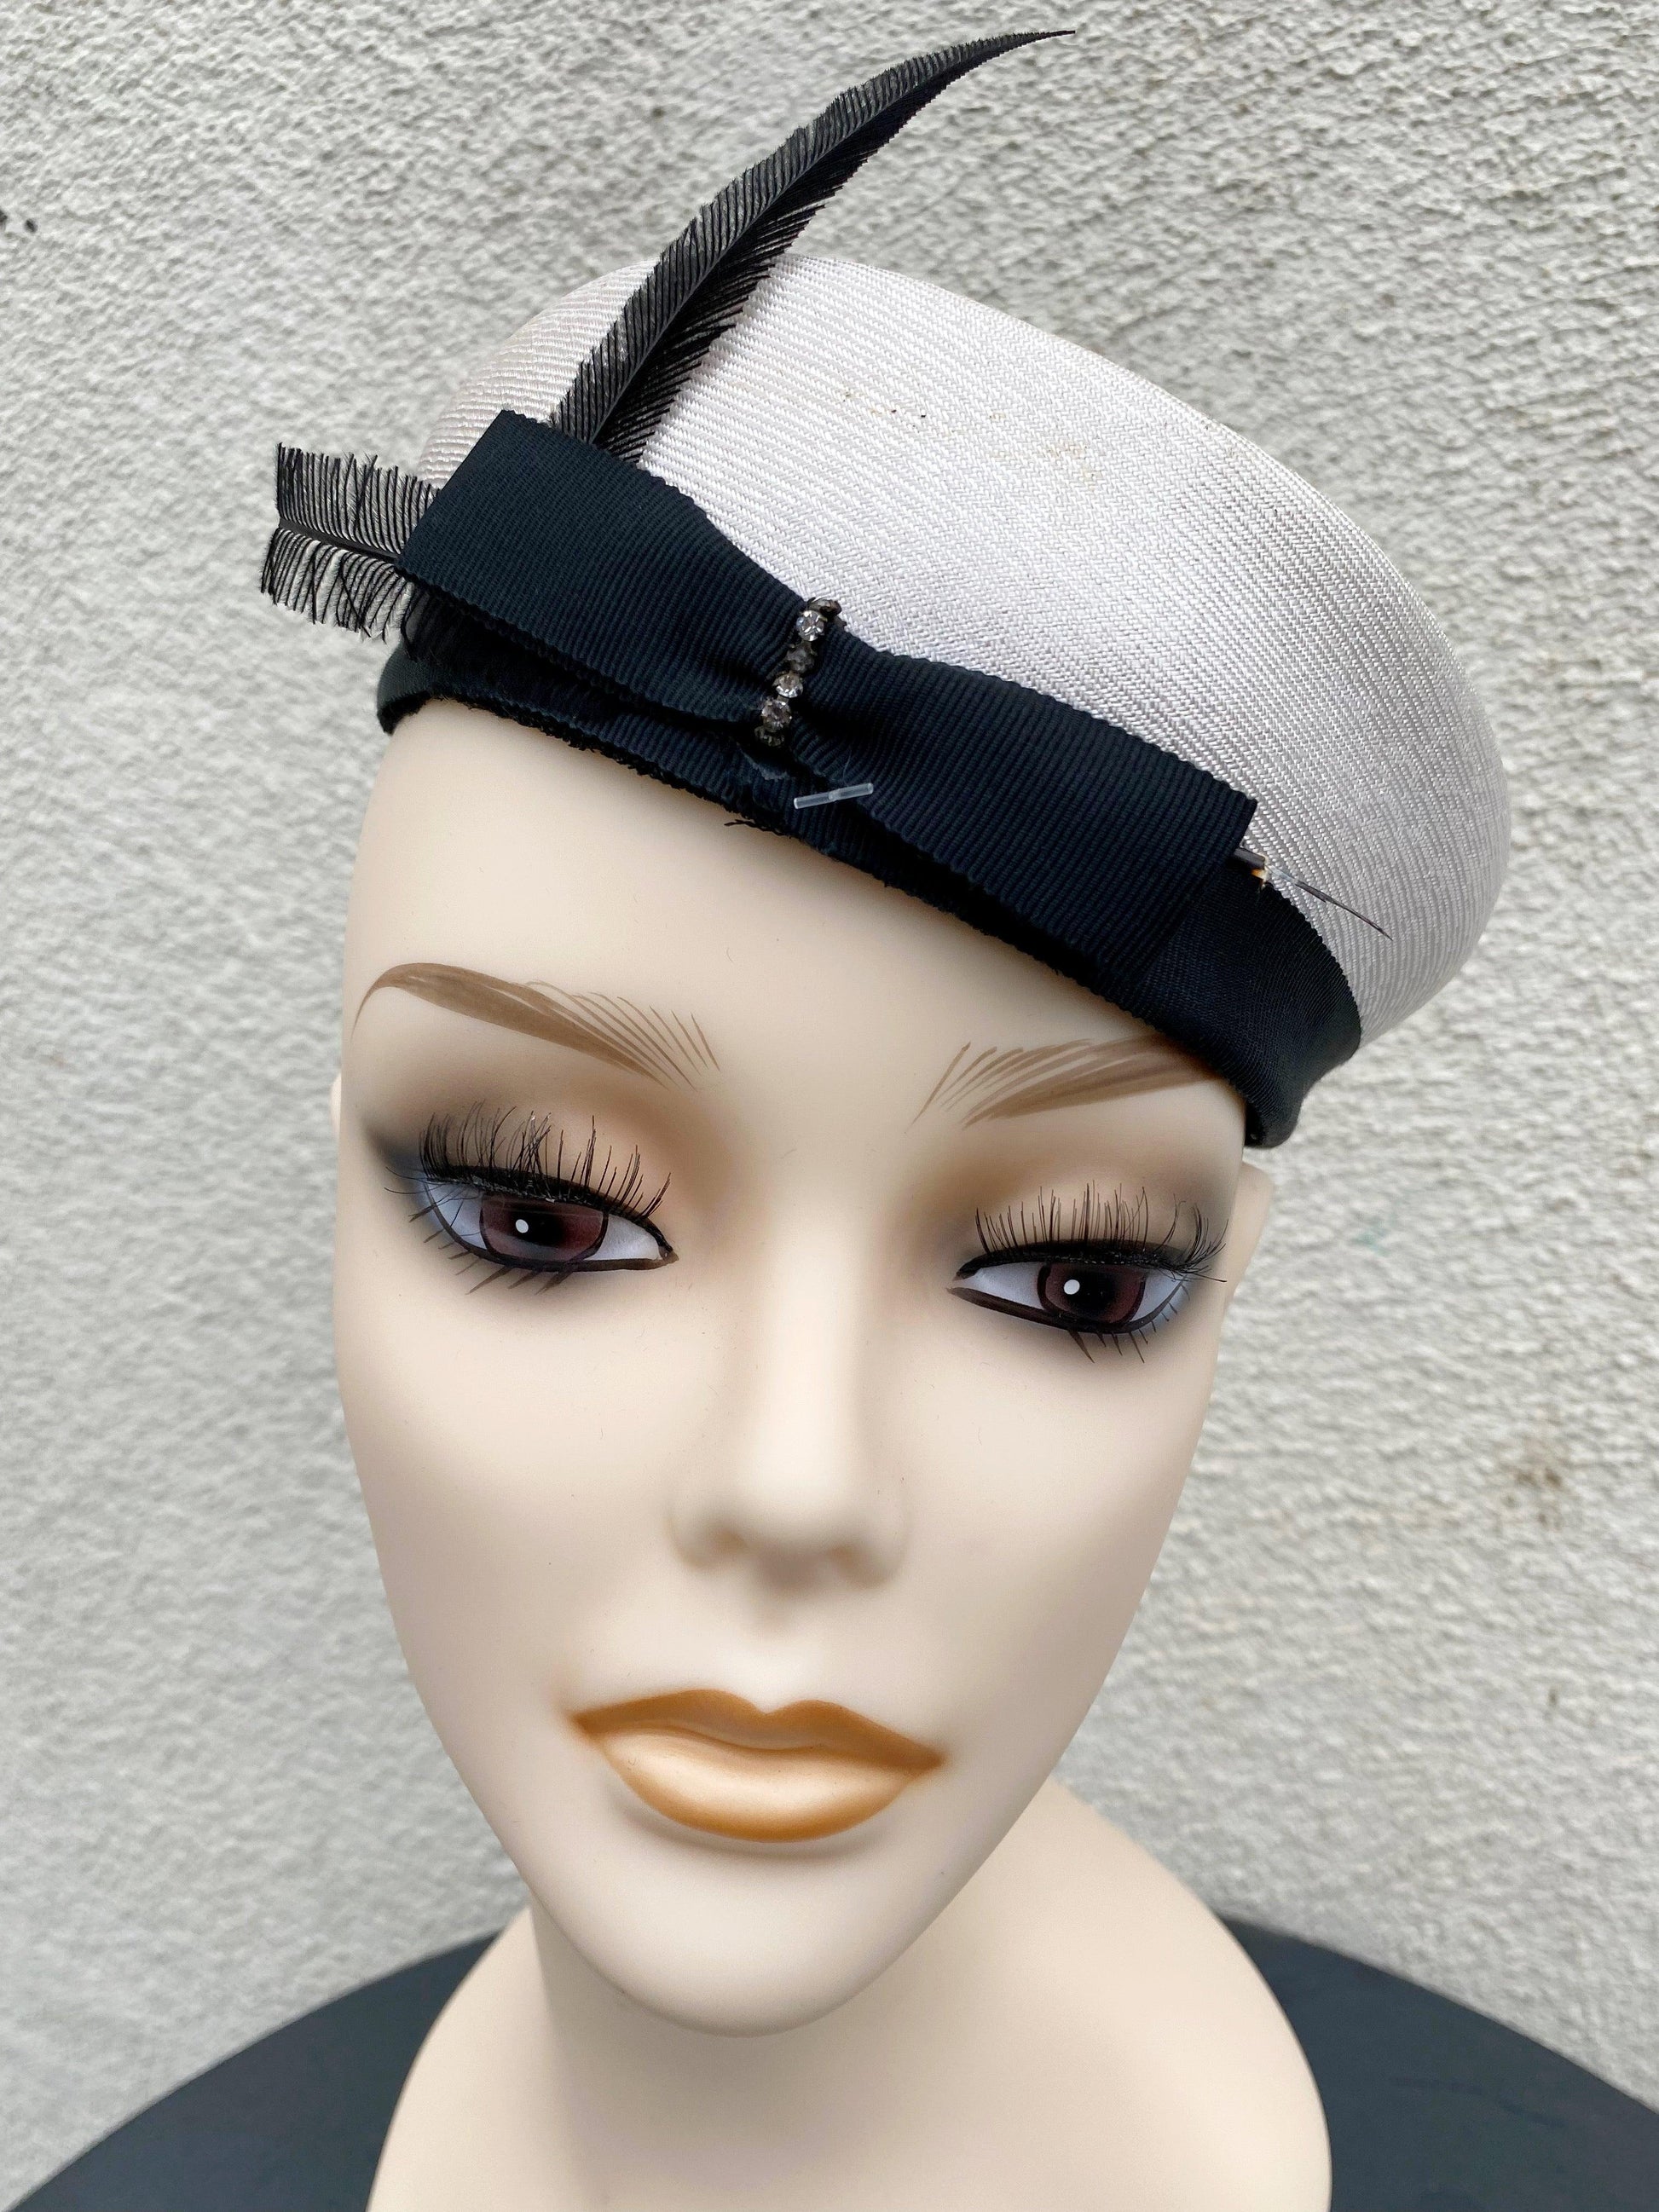 Vintage White with Black Trim Pillbox Hat with Feather - A Walk Thru Time Vintage